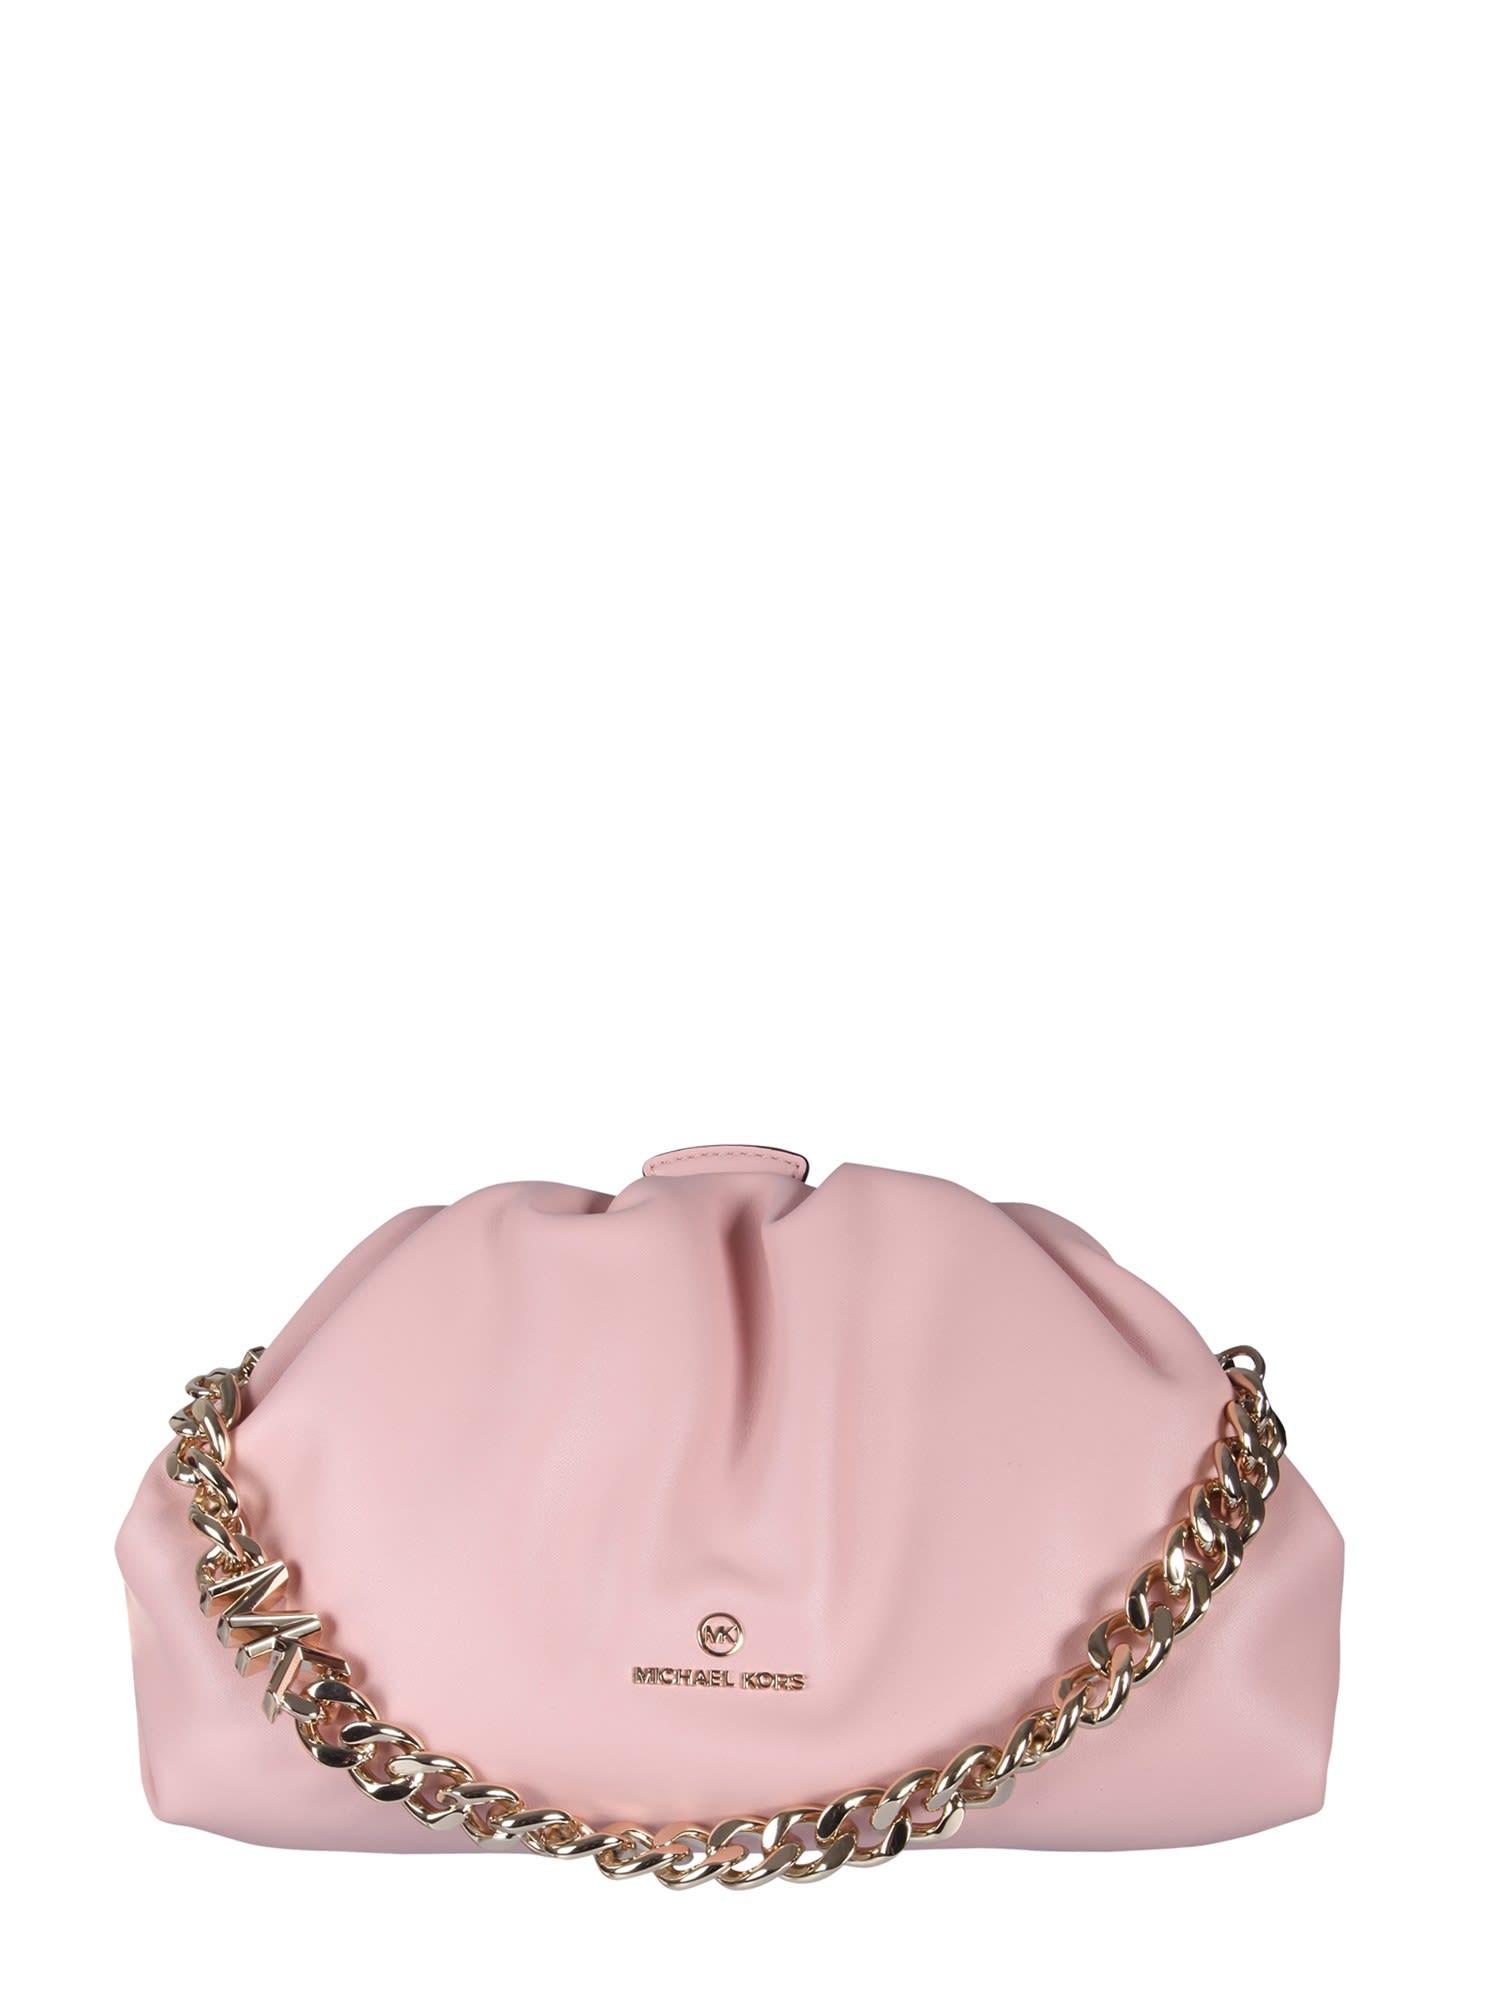 MICHAEL Michael Kors Nola Chained Small Clutch Bag in Pink | Lyst